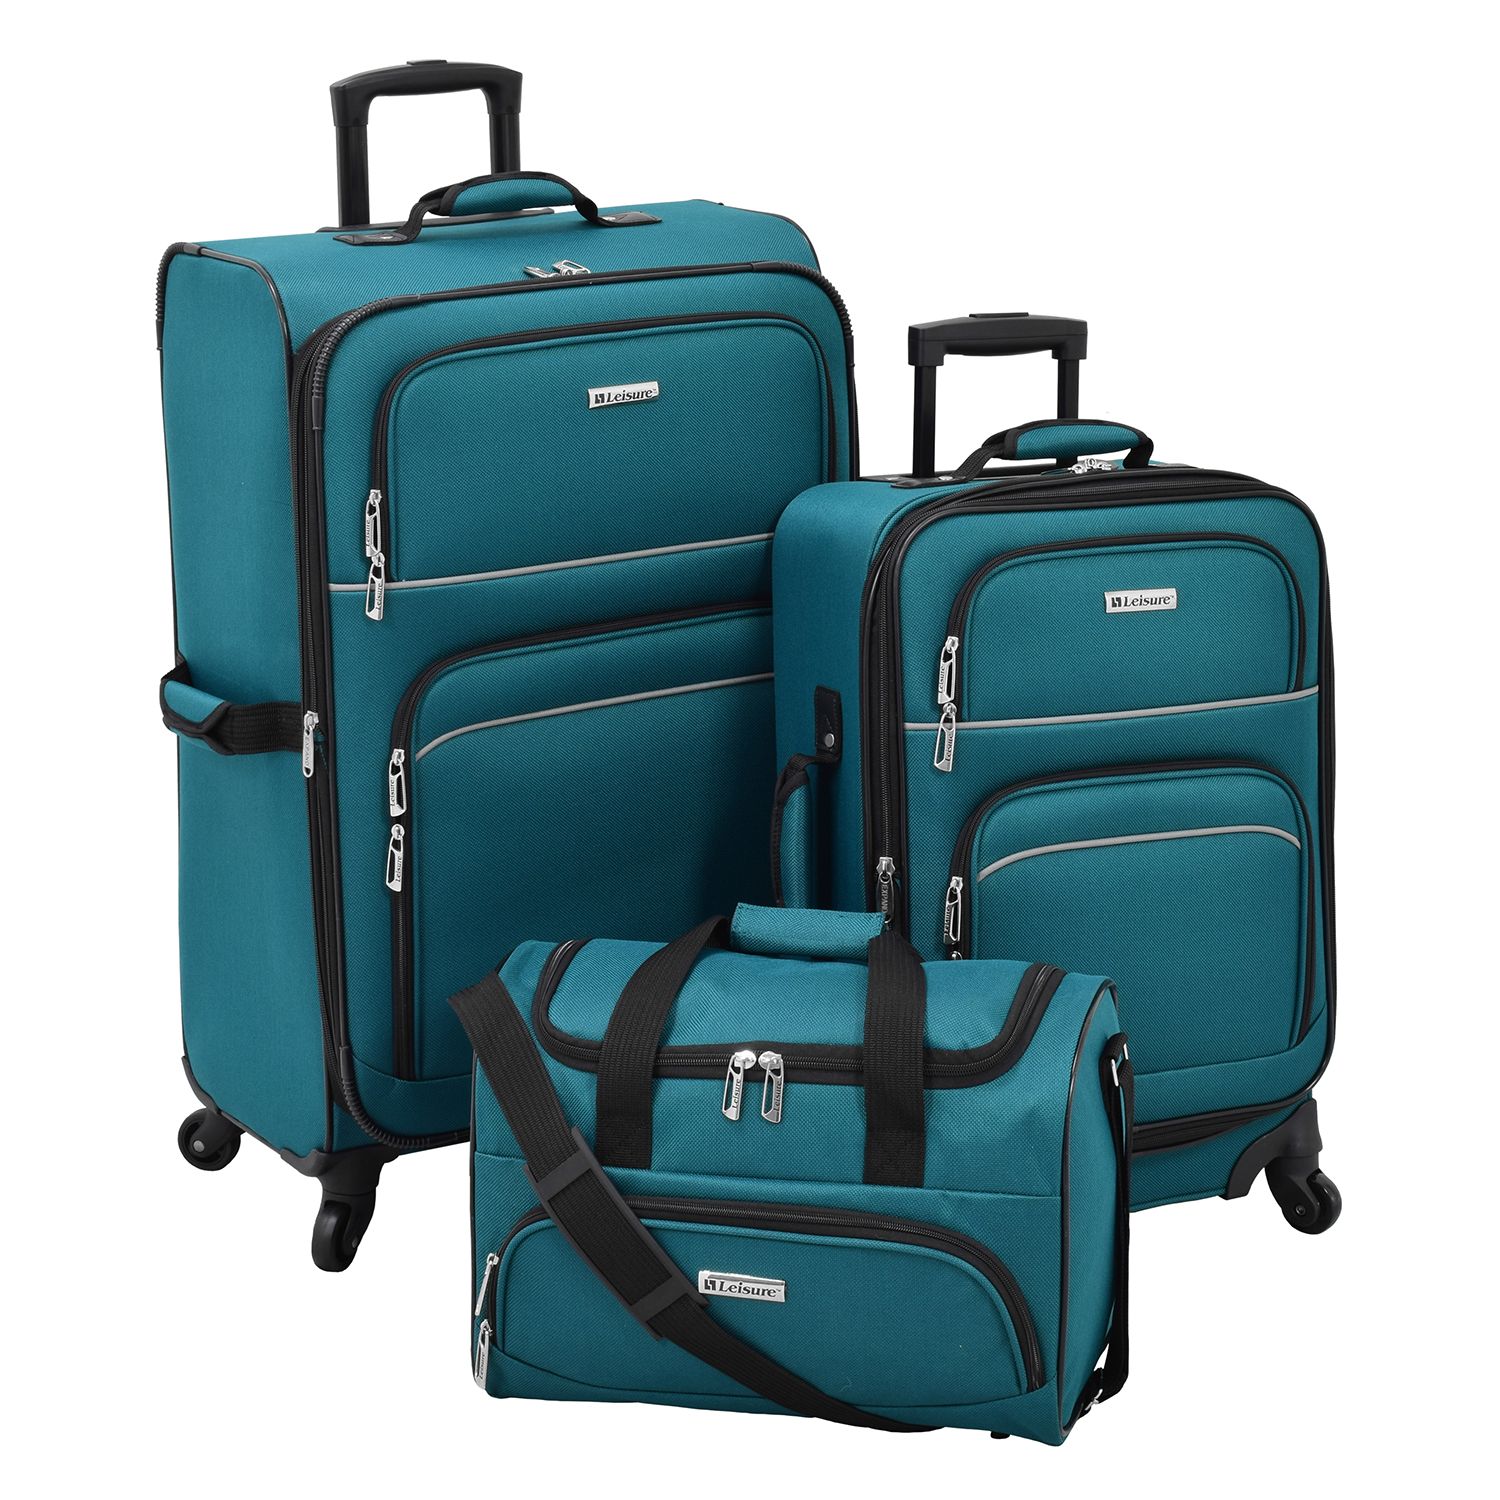 Suitcase Bags Near Me